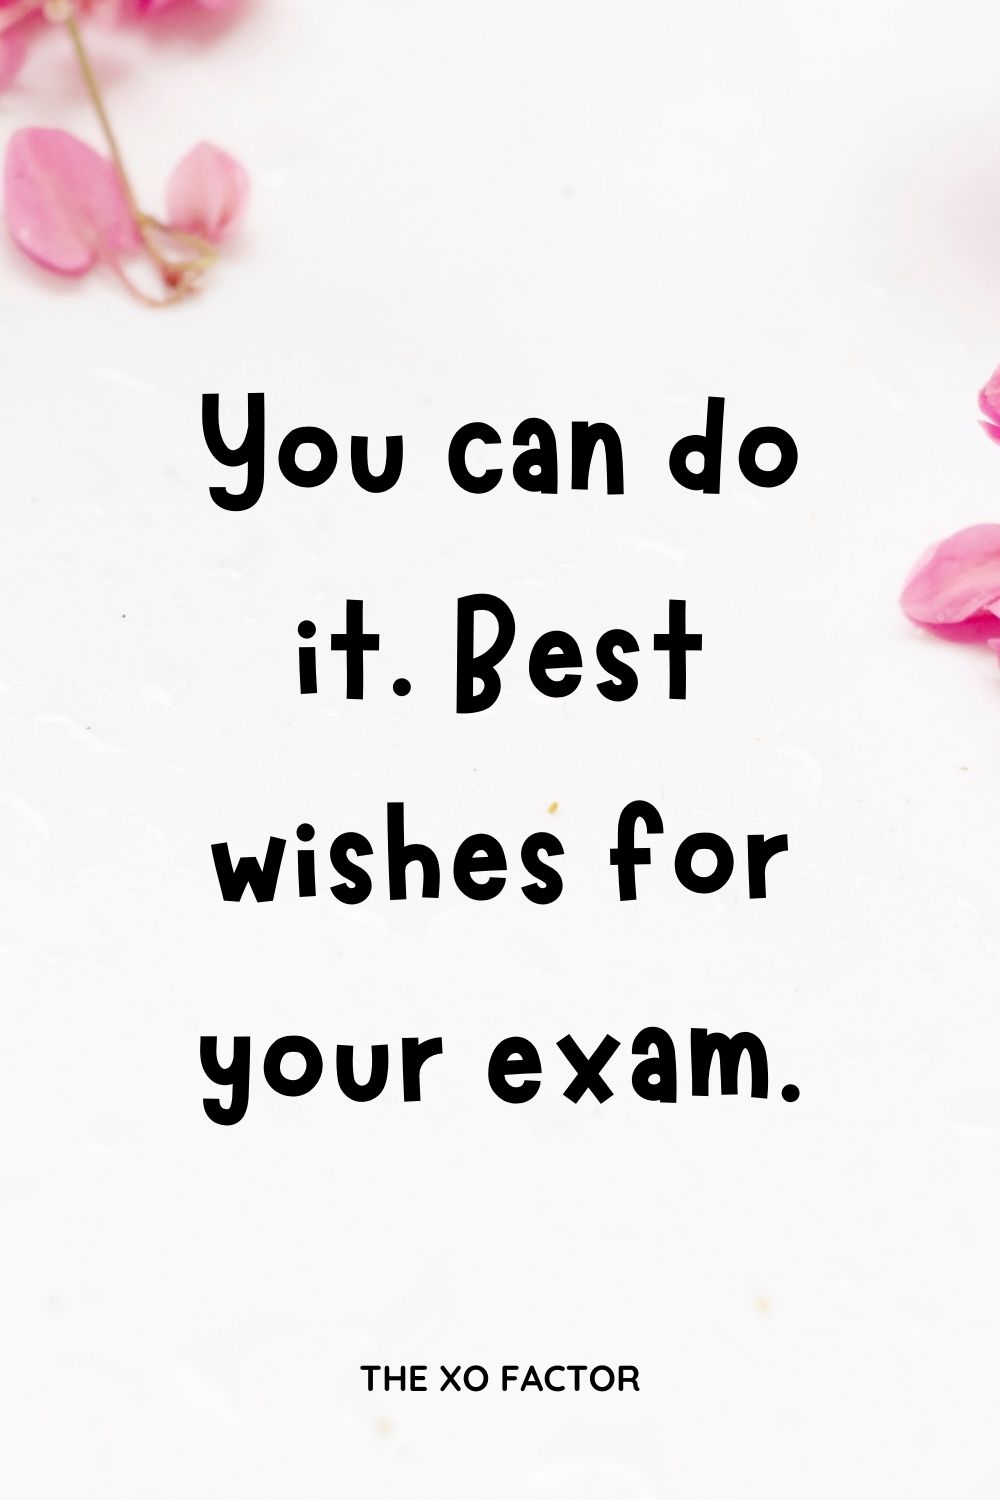 You can do it. Best wishes for your exam.